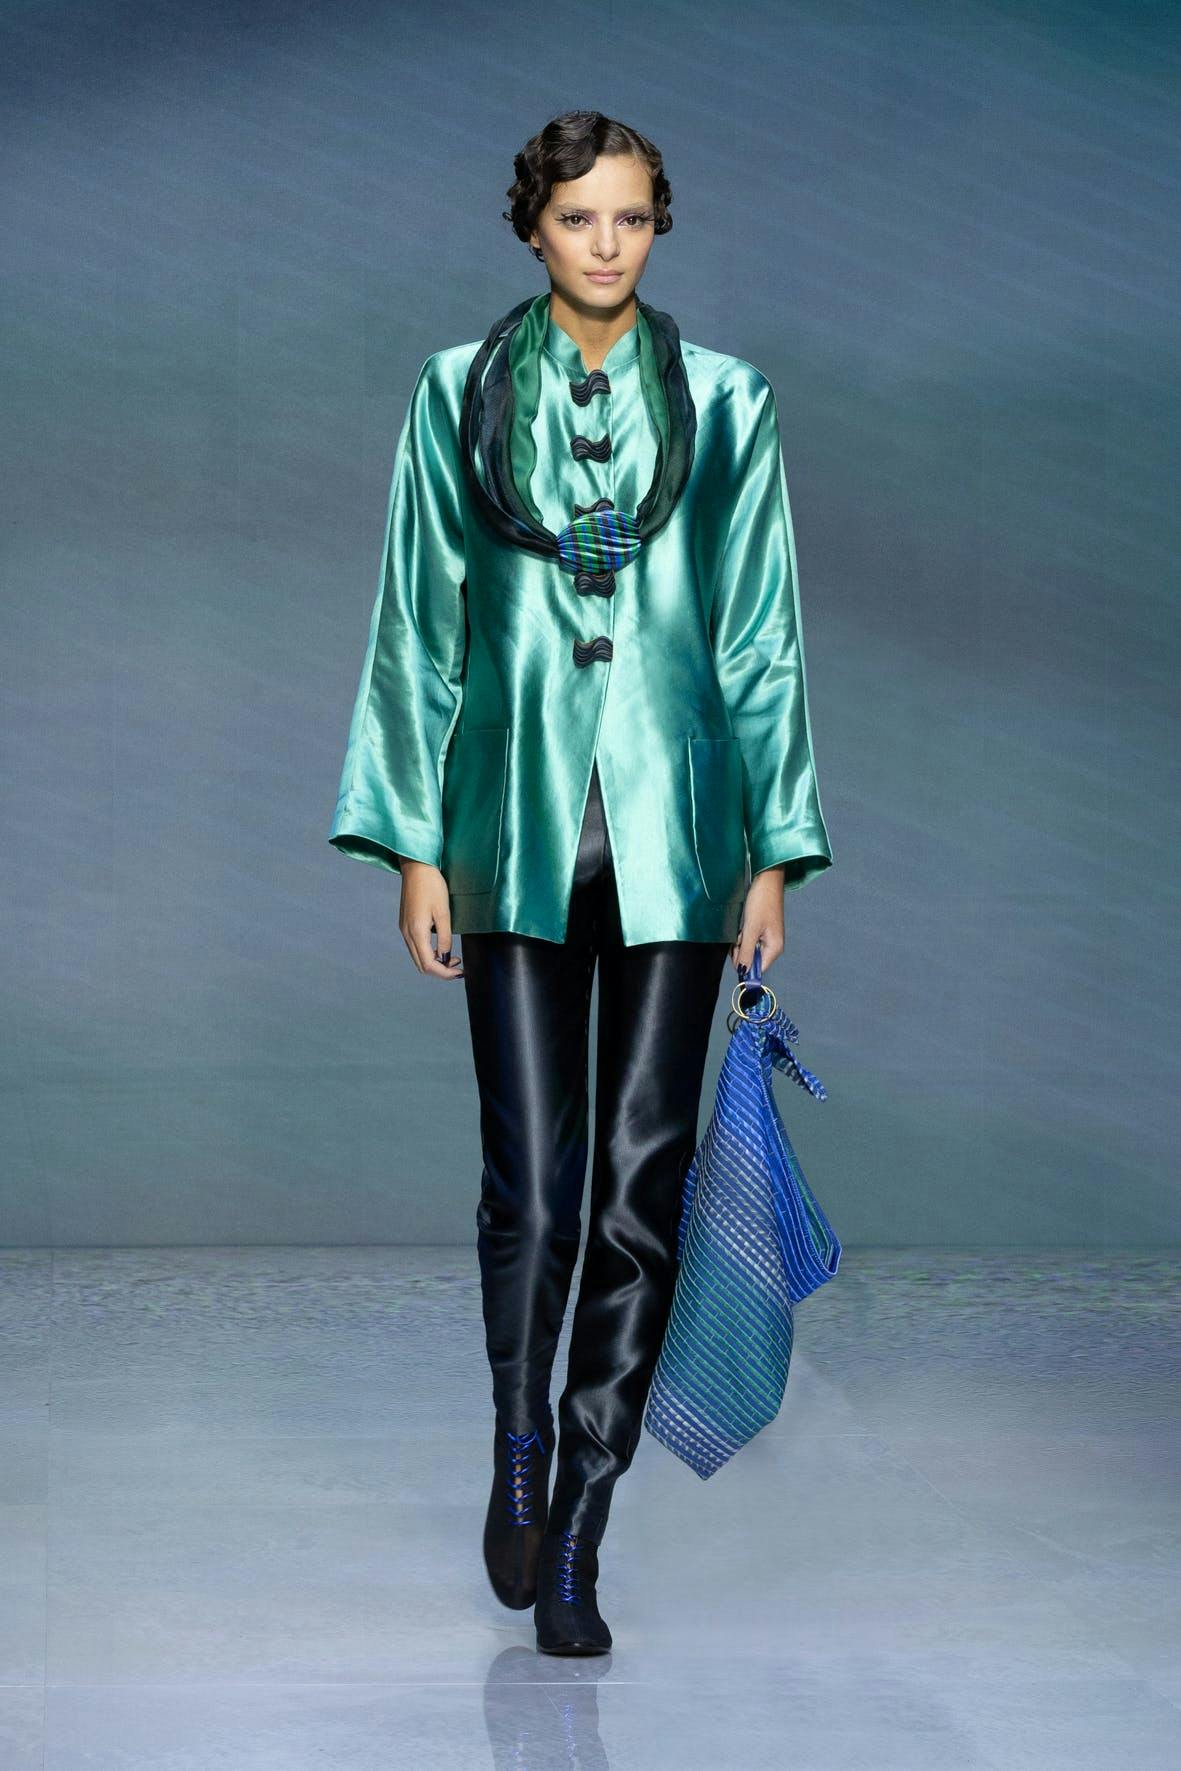 model in irridescent green jacket and black trousers